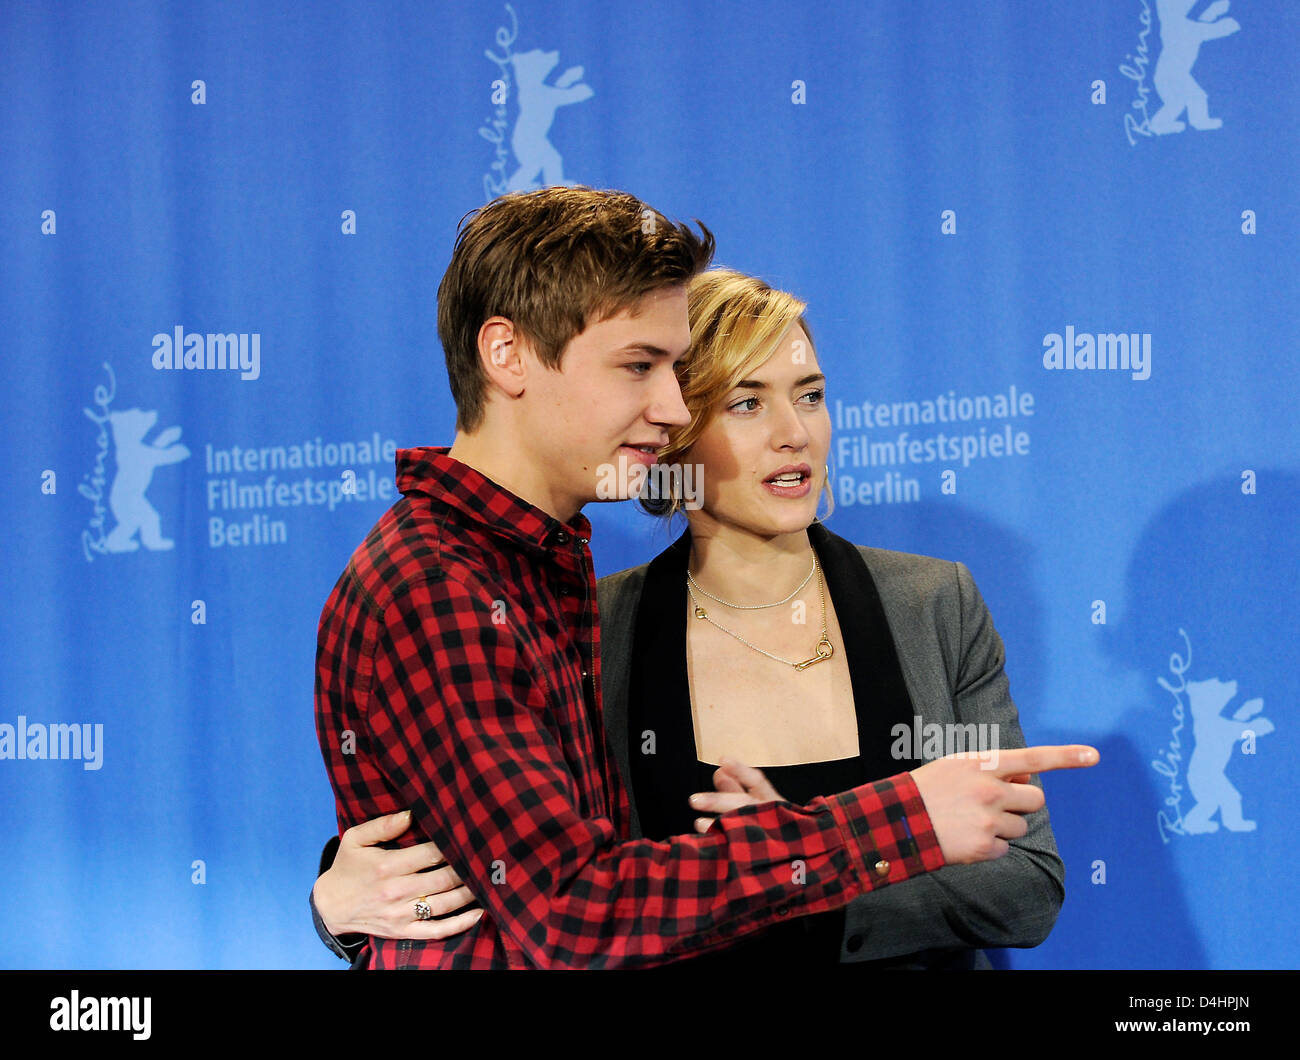 German actor David Kross (L) and British actress Kate Winslet (R) pose during a photo call of their film ?The Reader? at the Berlin International Film Festival in Berlin, Germany, 06